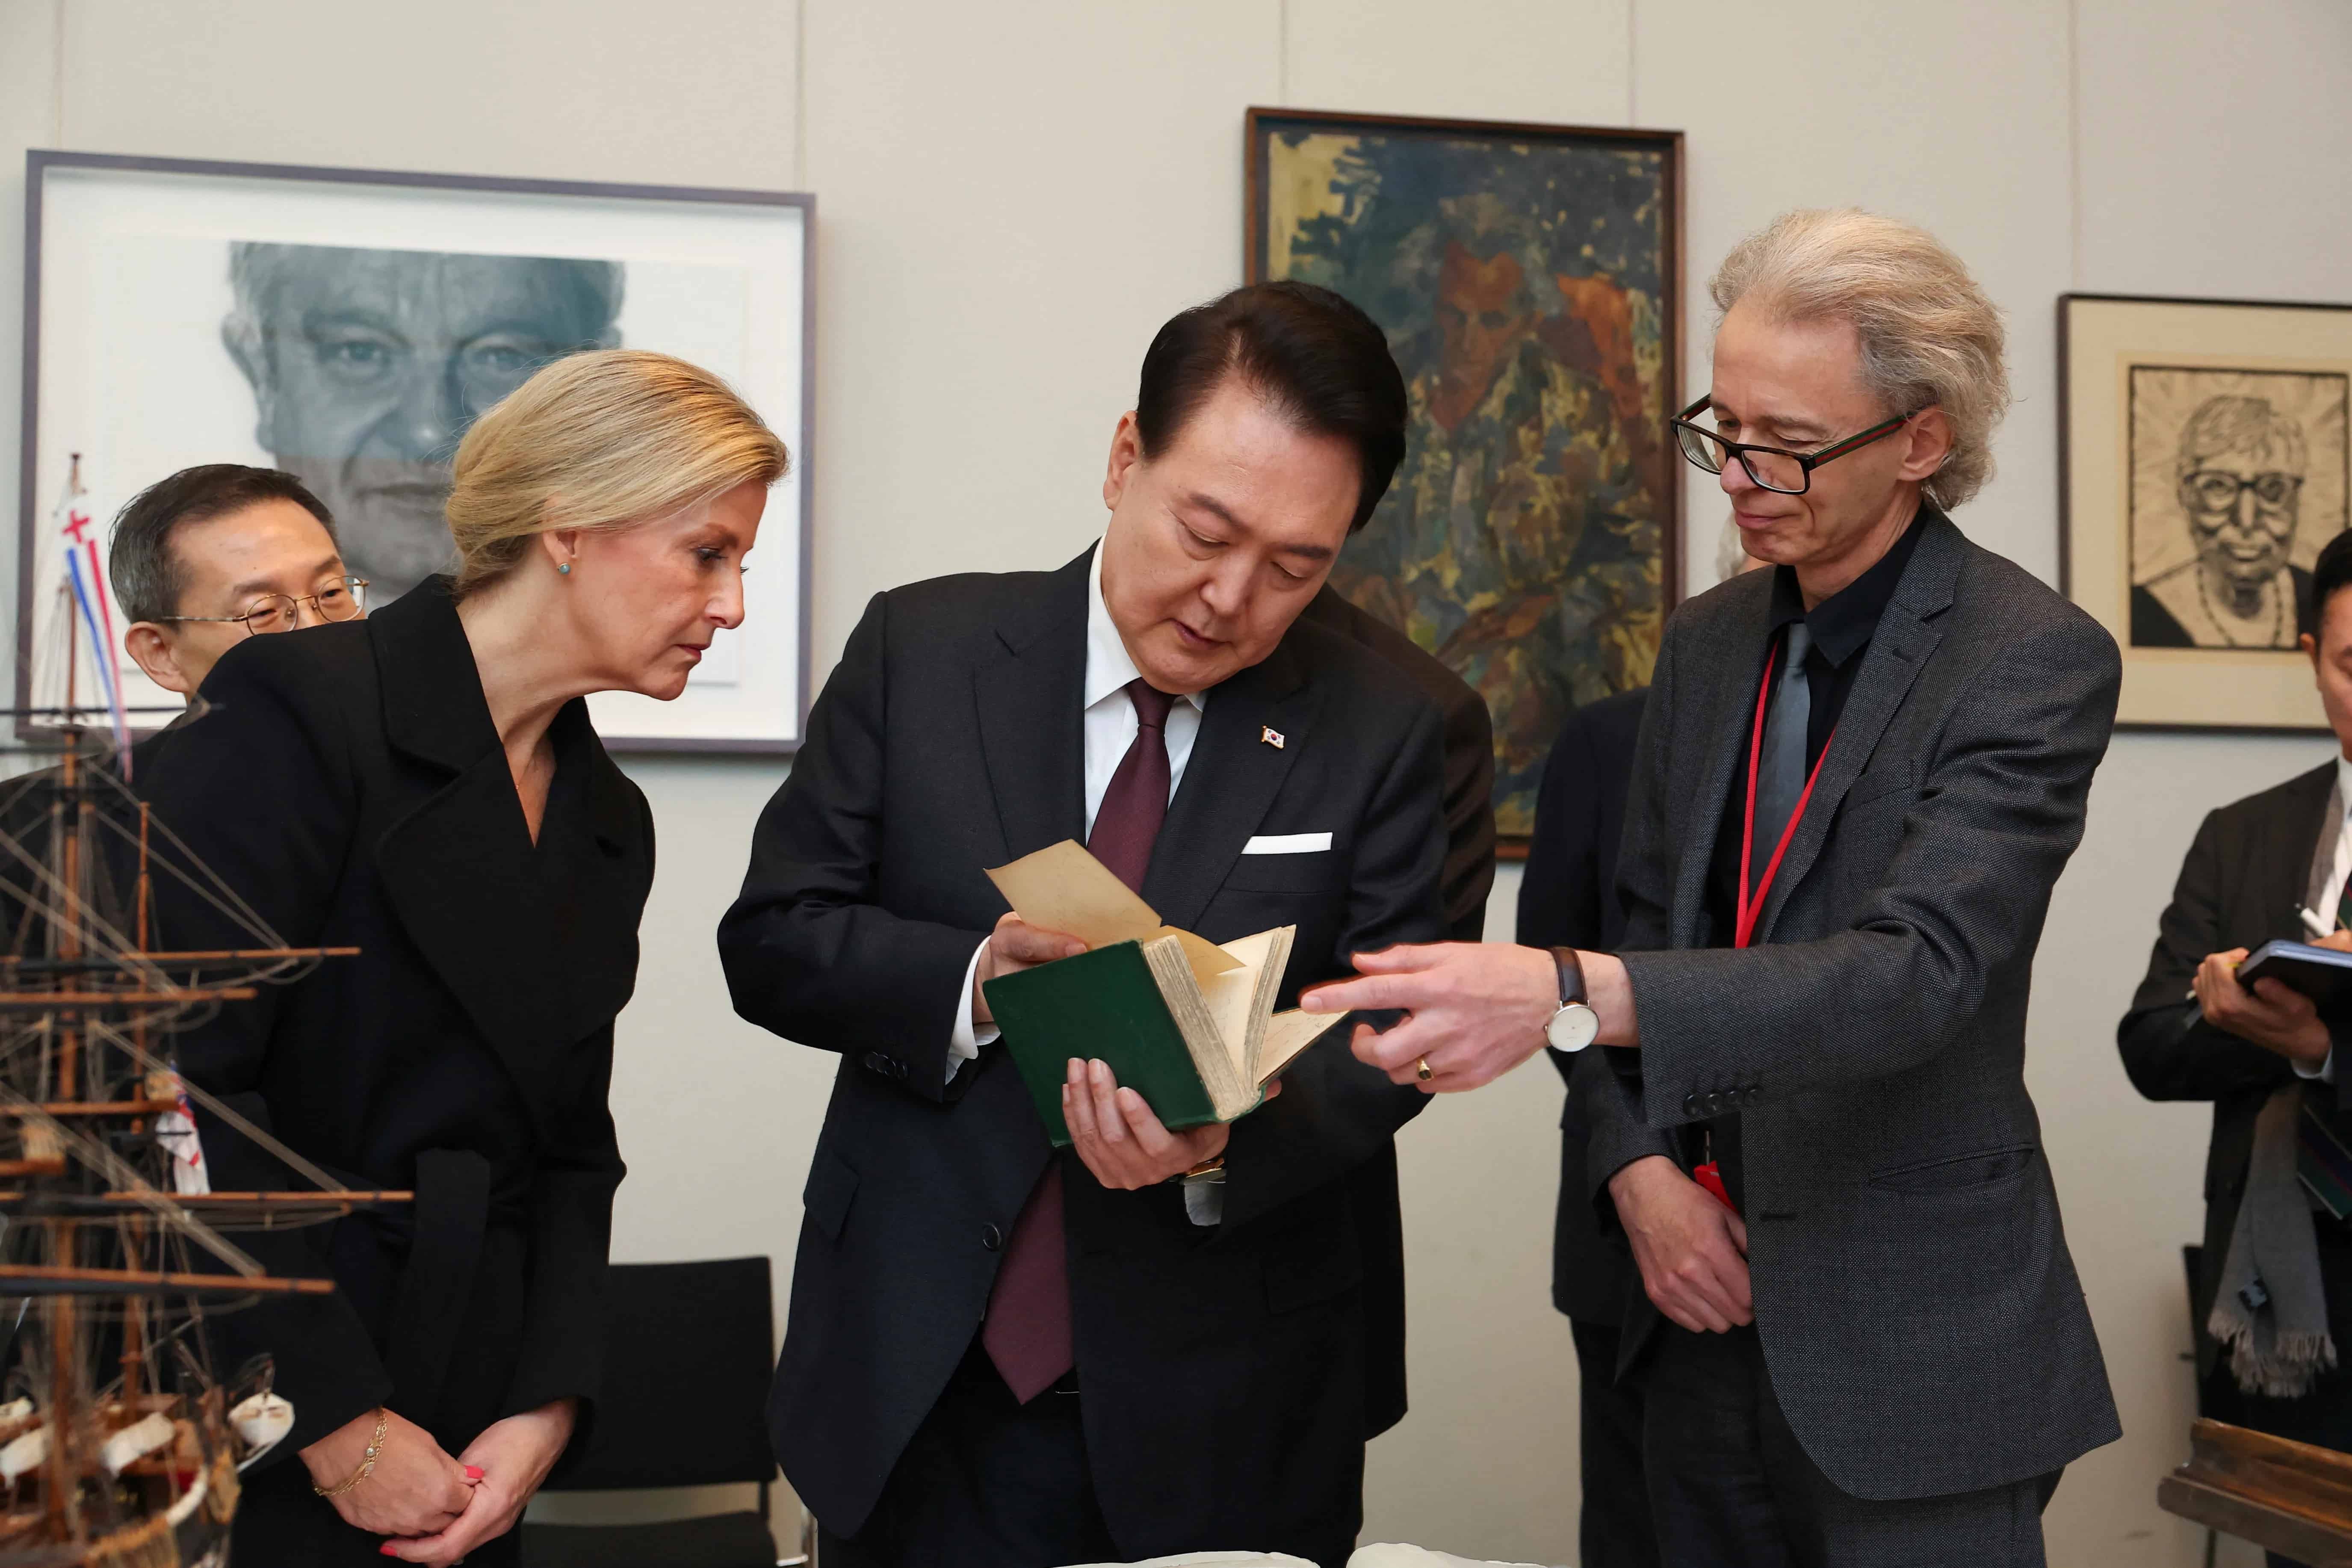 4 of 4 | Head of Library at The Royal Society, Keith Moore, right, shows the first edition of Charles Darwins book Of the origin of species to South Koreas President Yoon Suk Yeol, center, and Britains Sophie, the Duchess of Edinburgh, on the occasion of Yeols visit to the Royal Society, in London, Wednesday, Nov. 22, 2023. Yeol is on a three-day state visit to Britain. (Toby Melville/Pool Photo via AP)